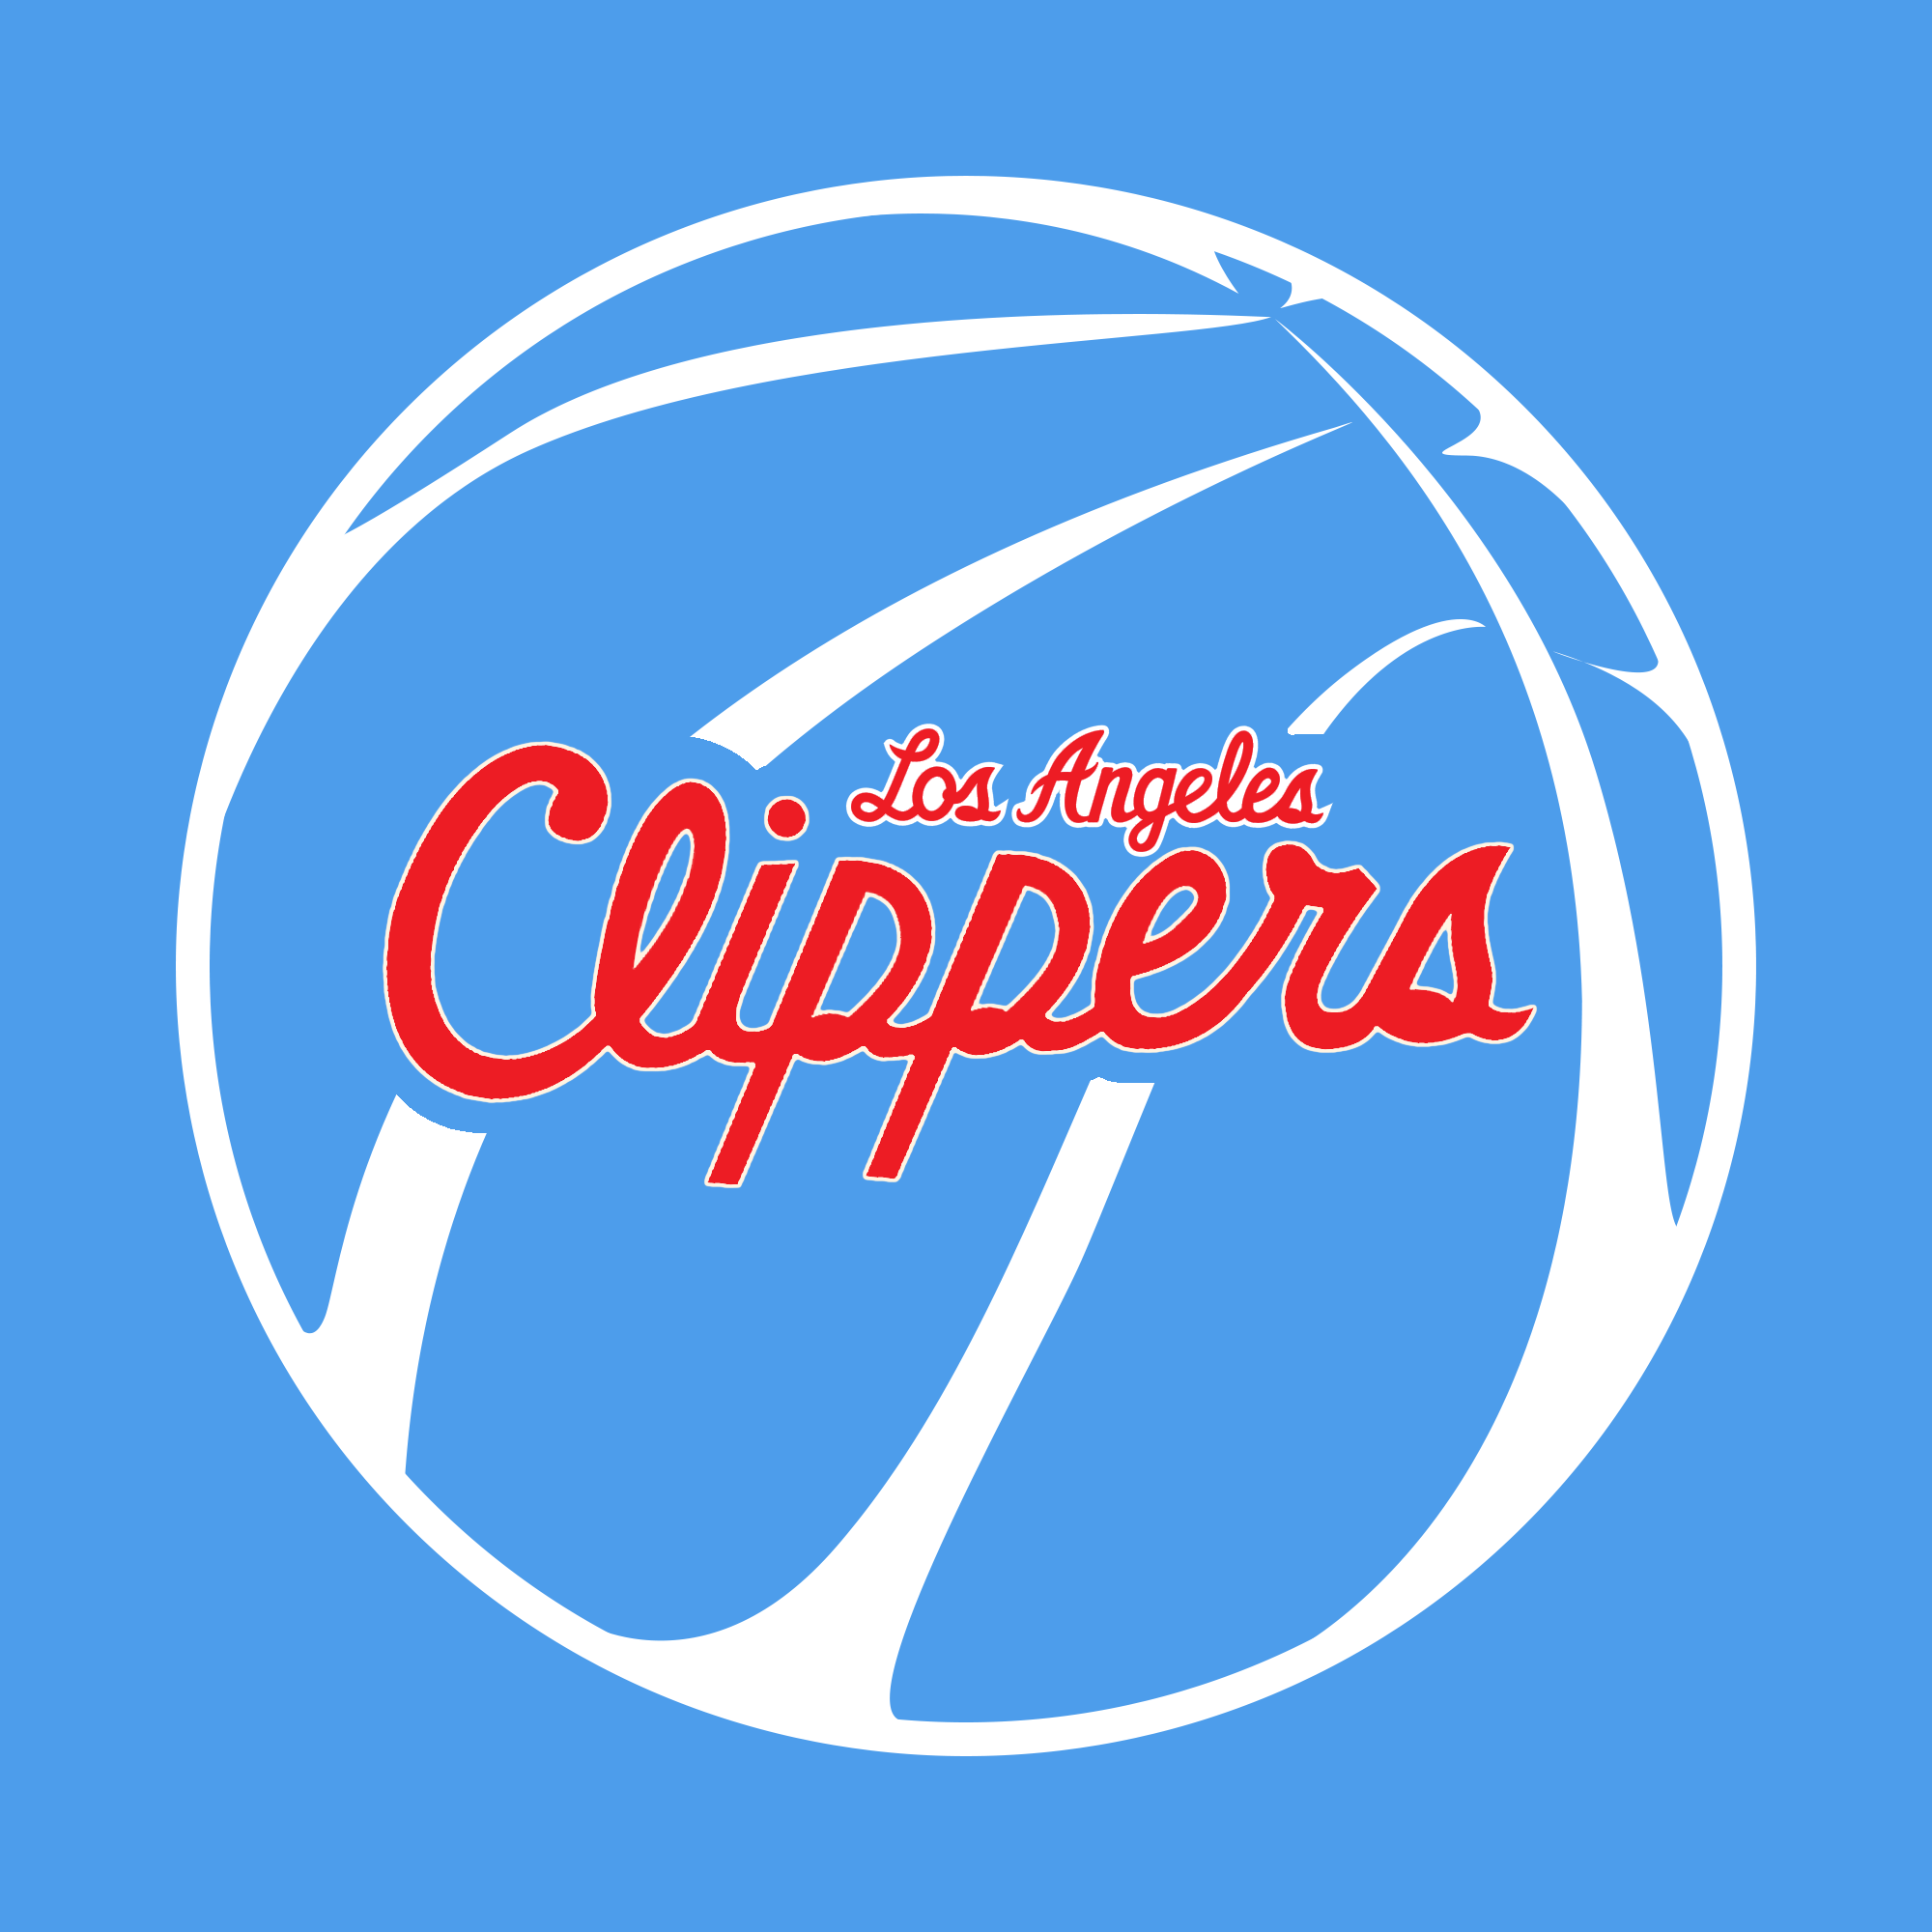 Los Angeles Clippers Concept - Concepts - Chris Creamer's Sports